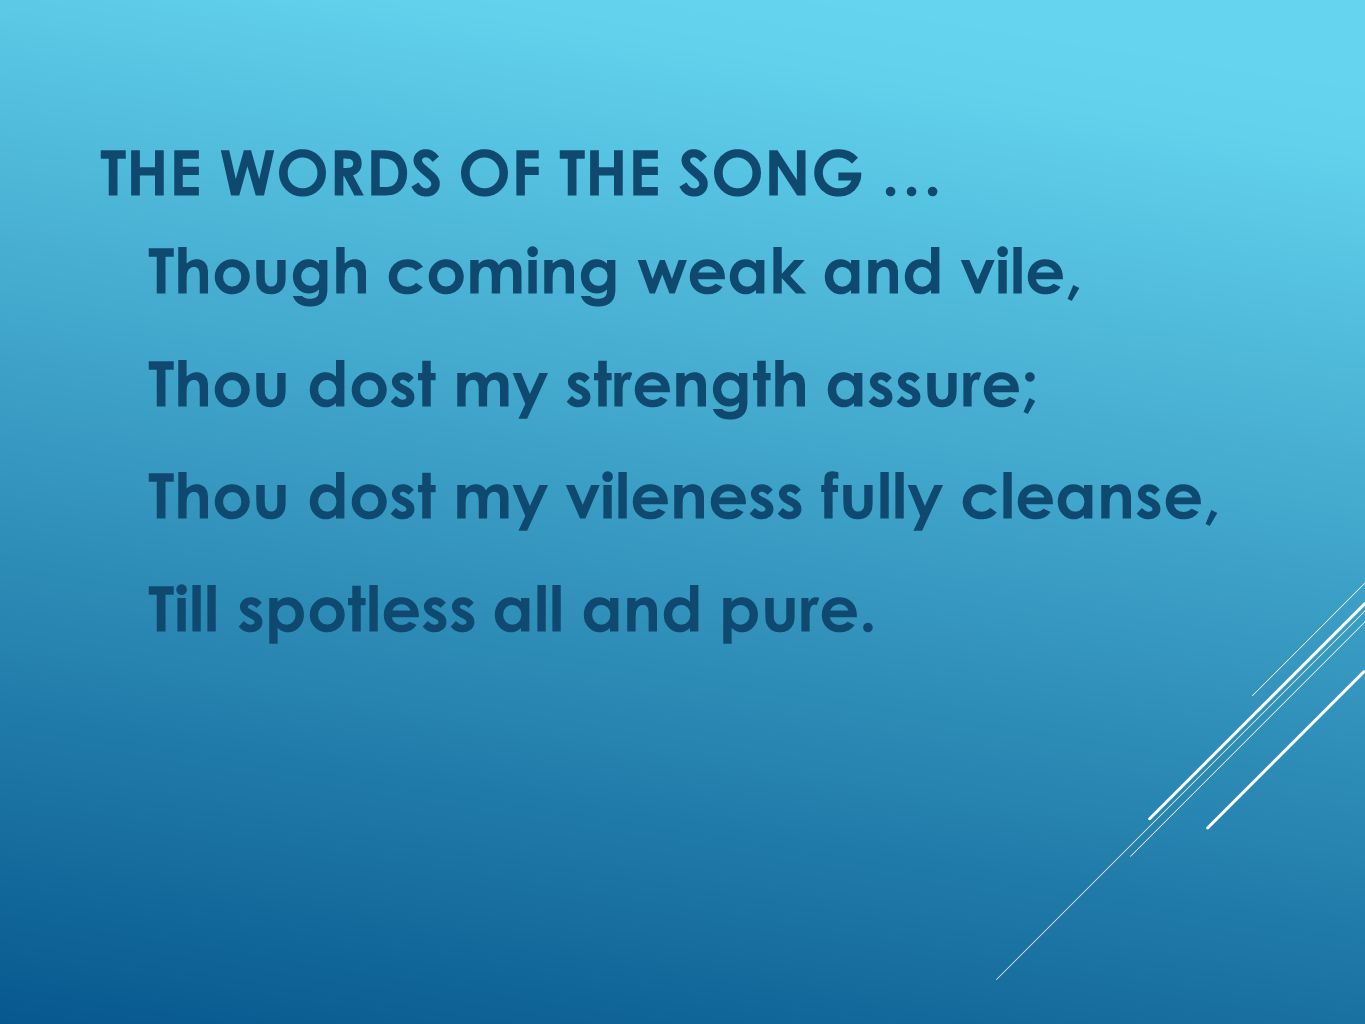 THE WORDS OF THE SONG … Though coming weak and vile, Thou dost my strength assure; Thou dost my vileness fully cleanse, Till spotless all and pure.